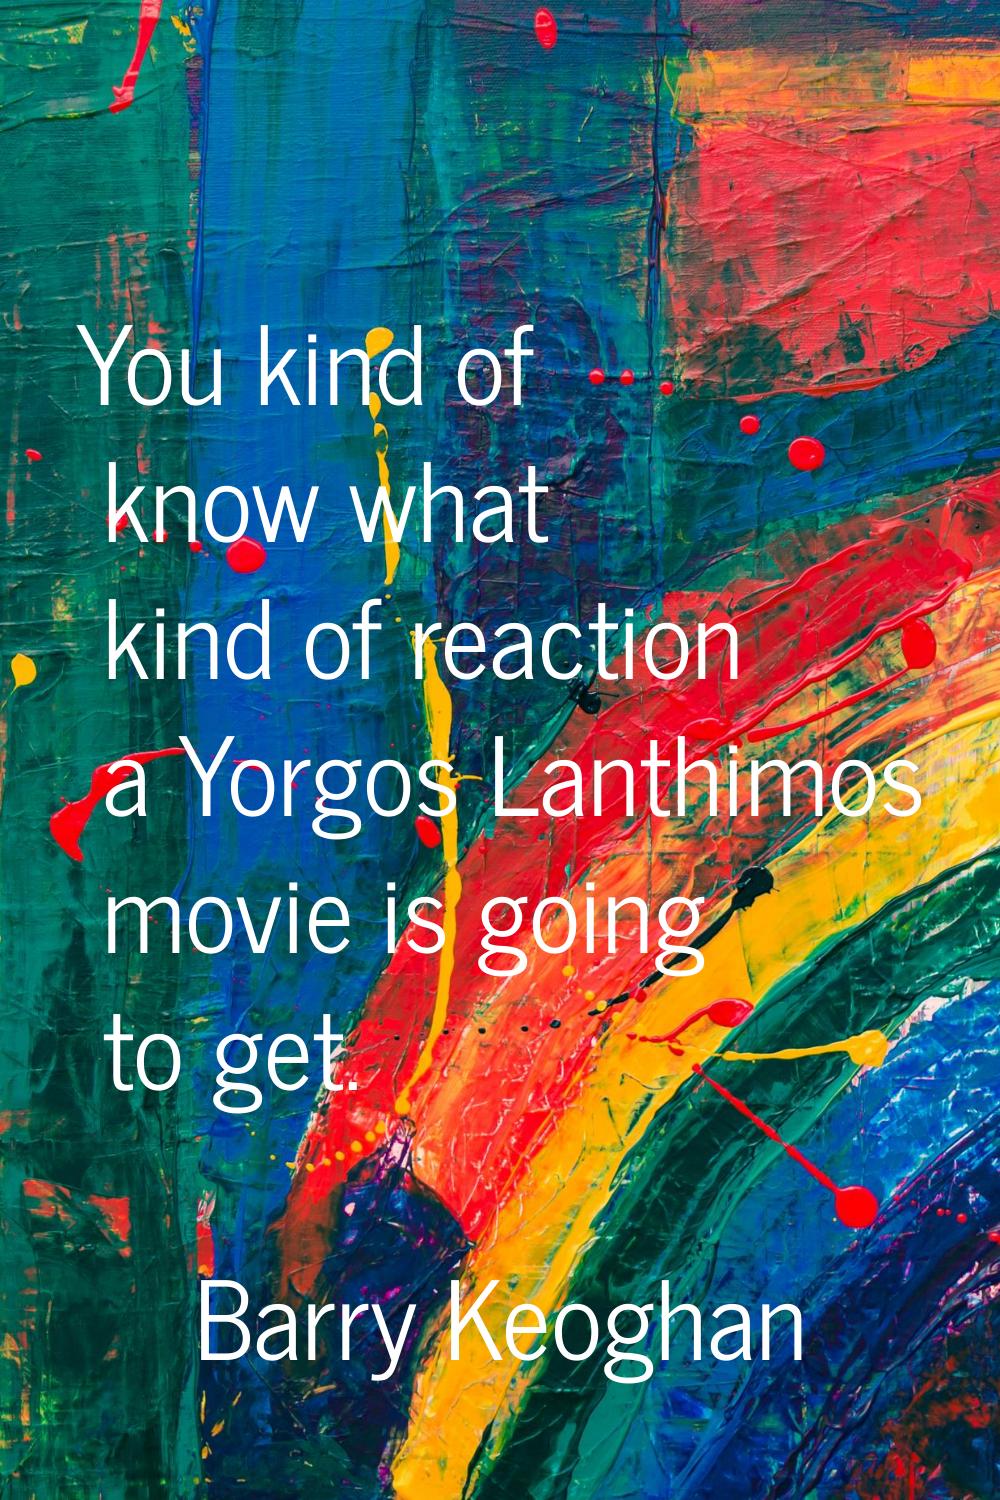 You kind of know what kind of reaction a Yorgos Lanthimos movie is going to get.